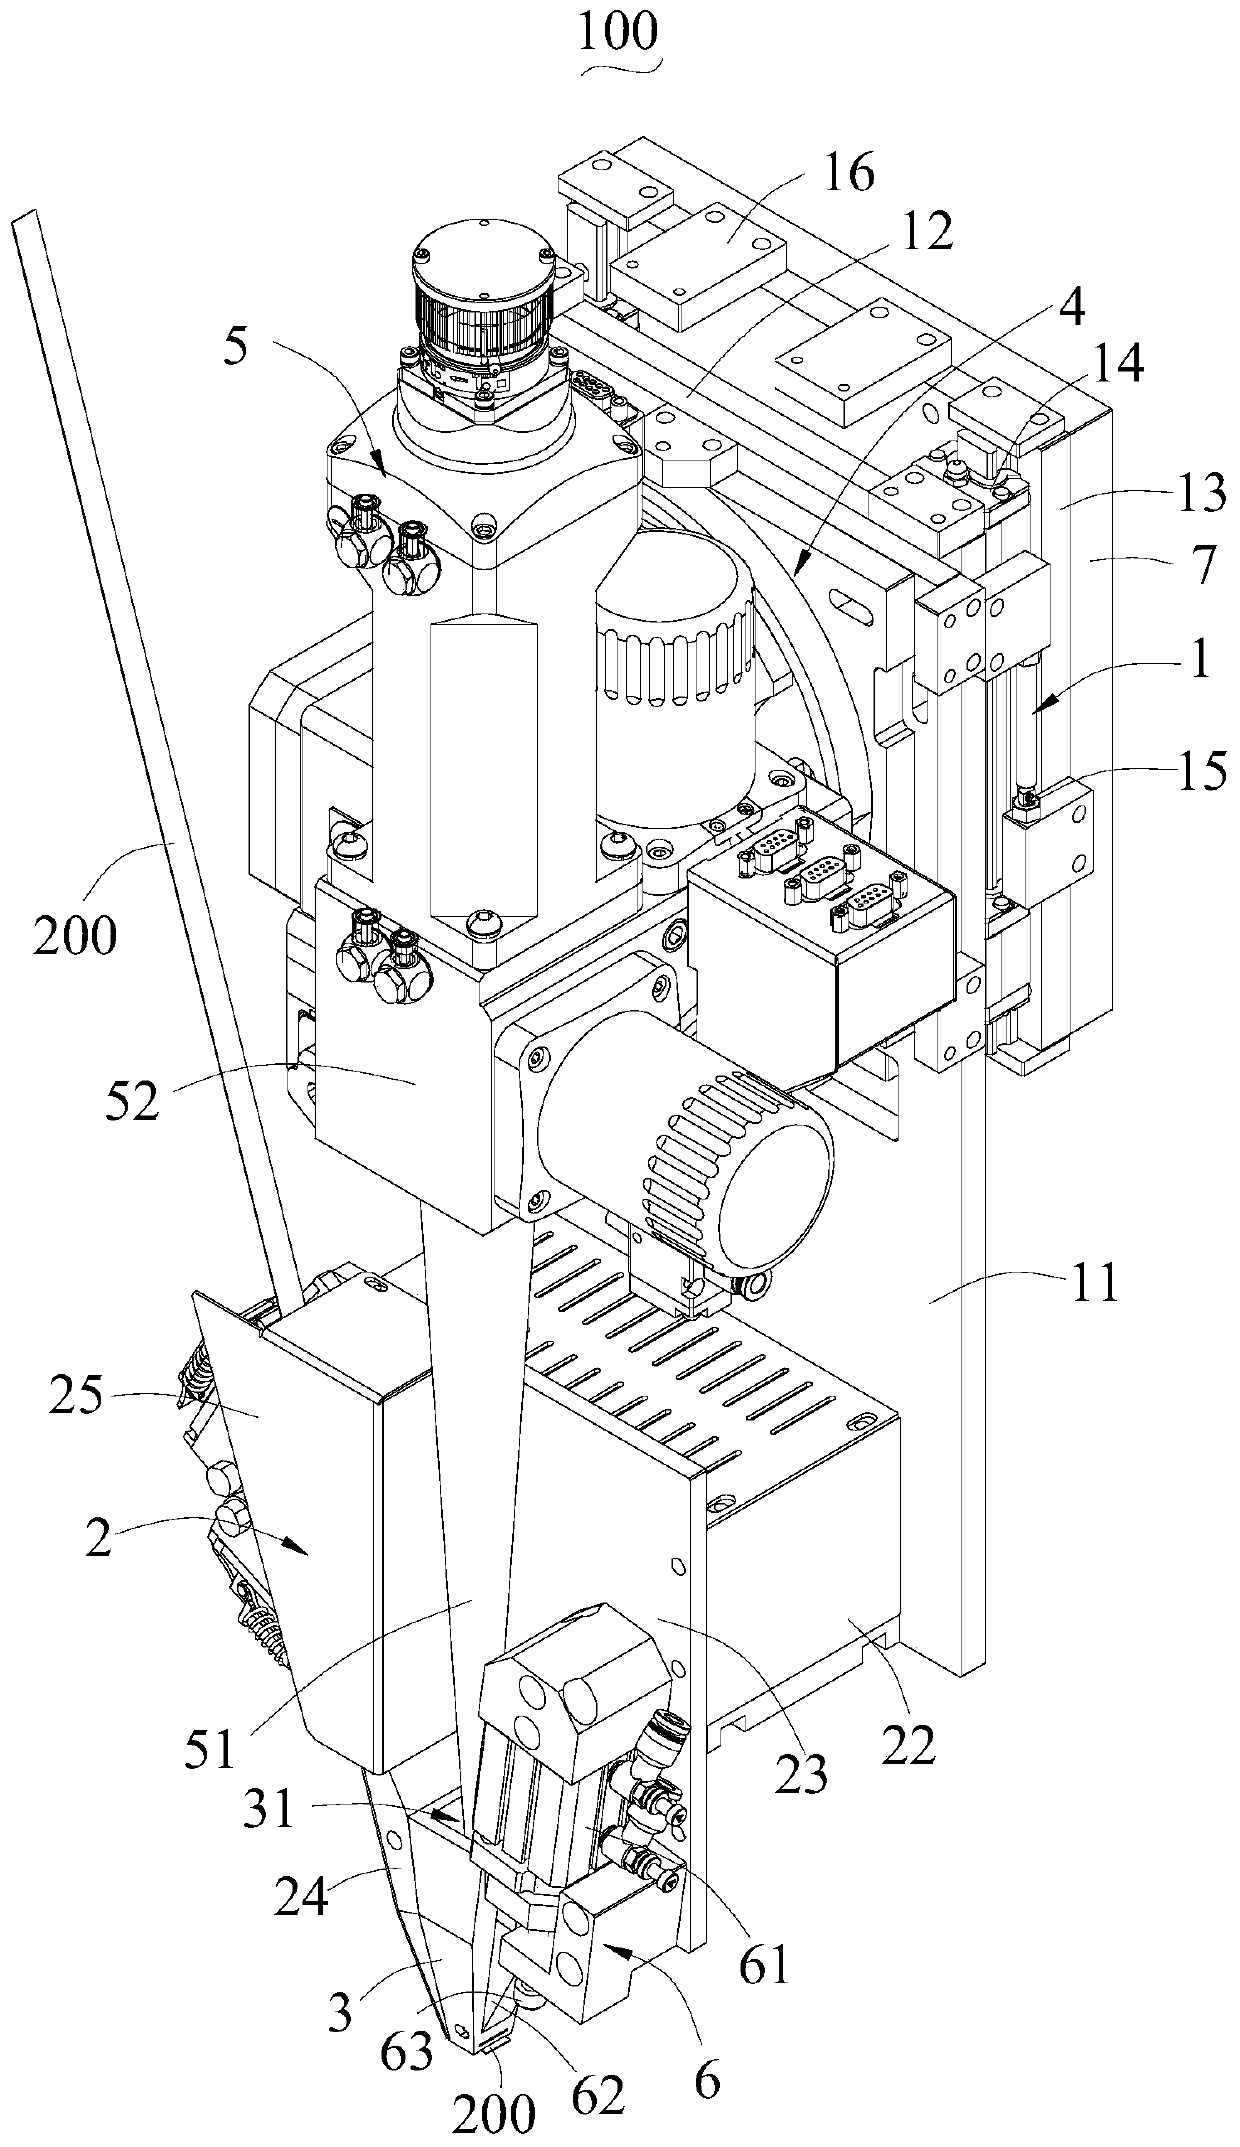 Integrated laser continuous welding device and battery assembling equipment